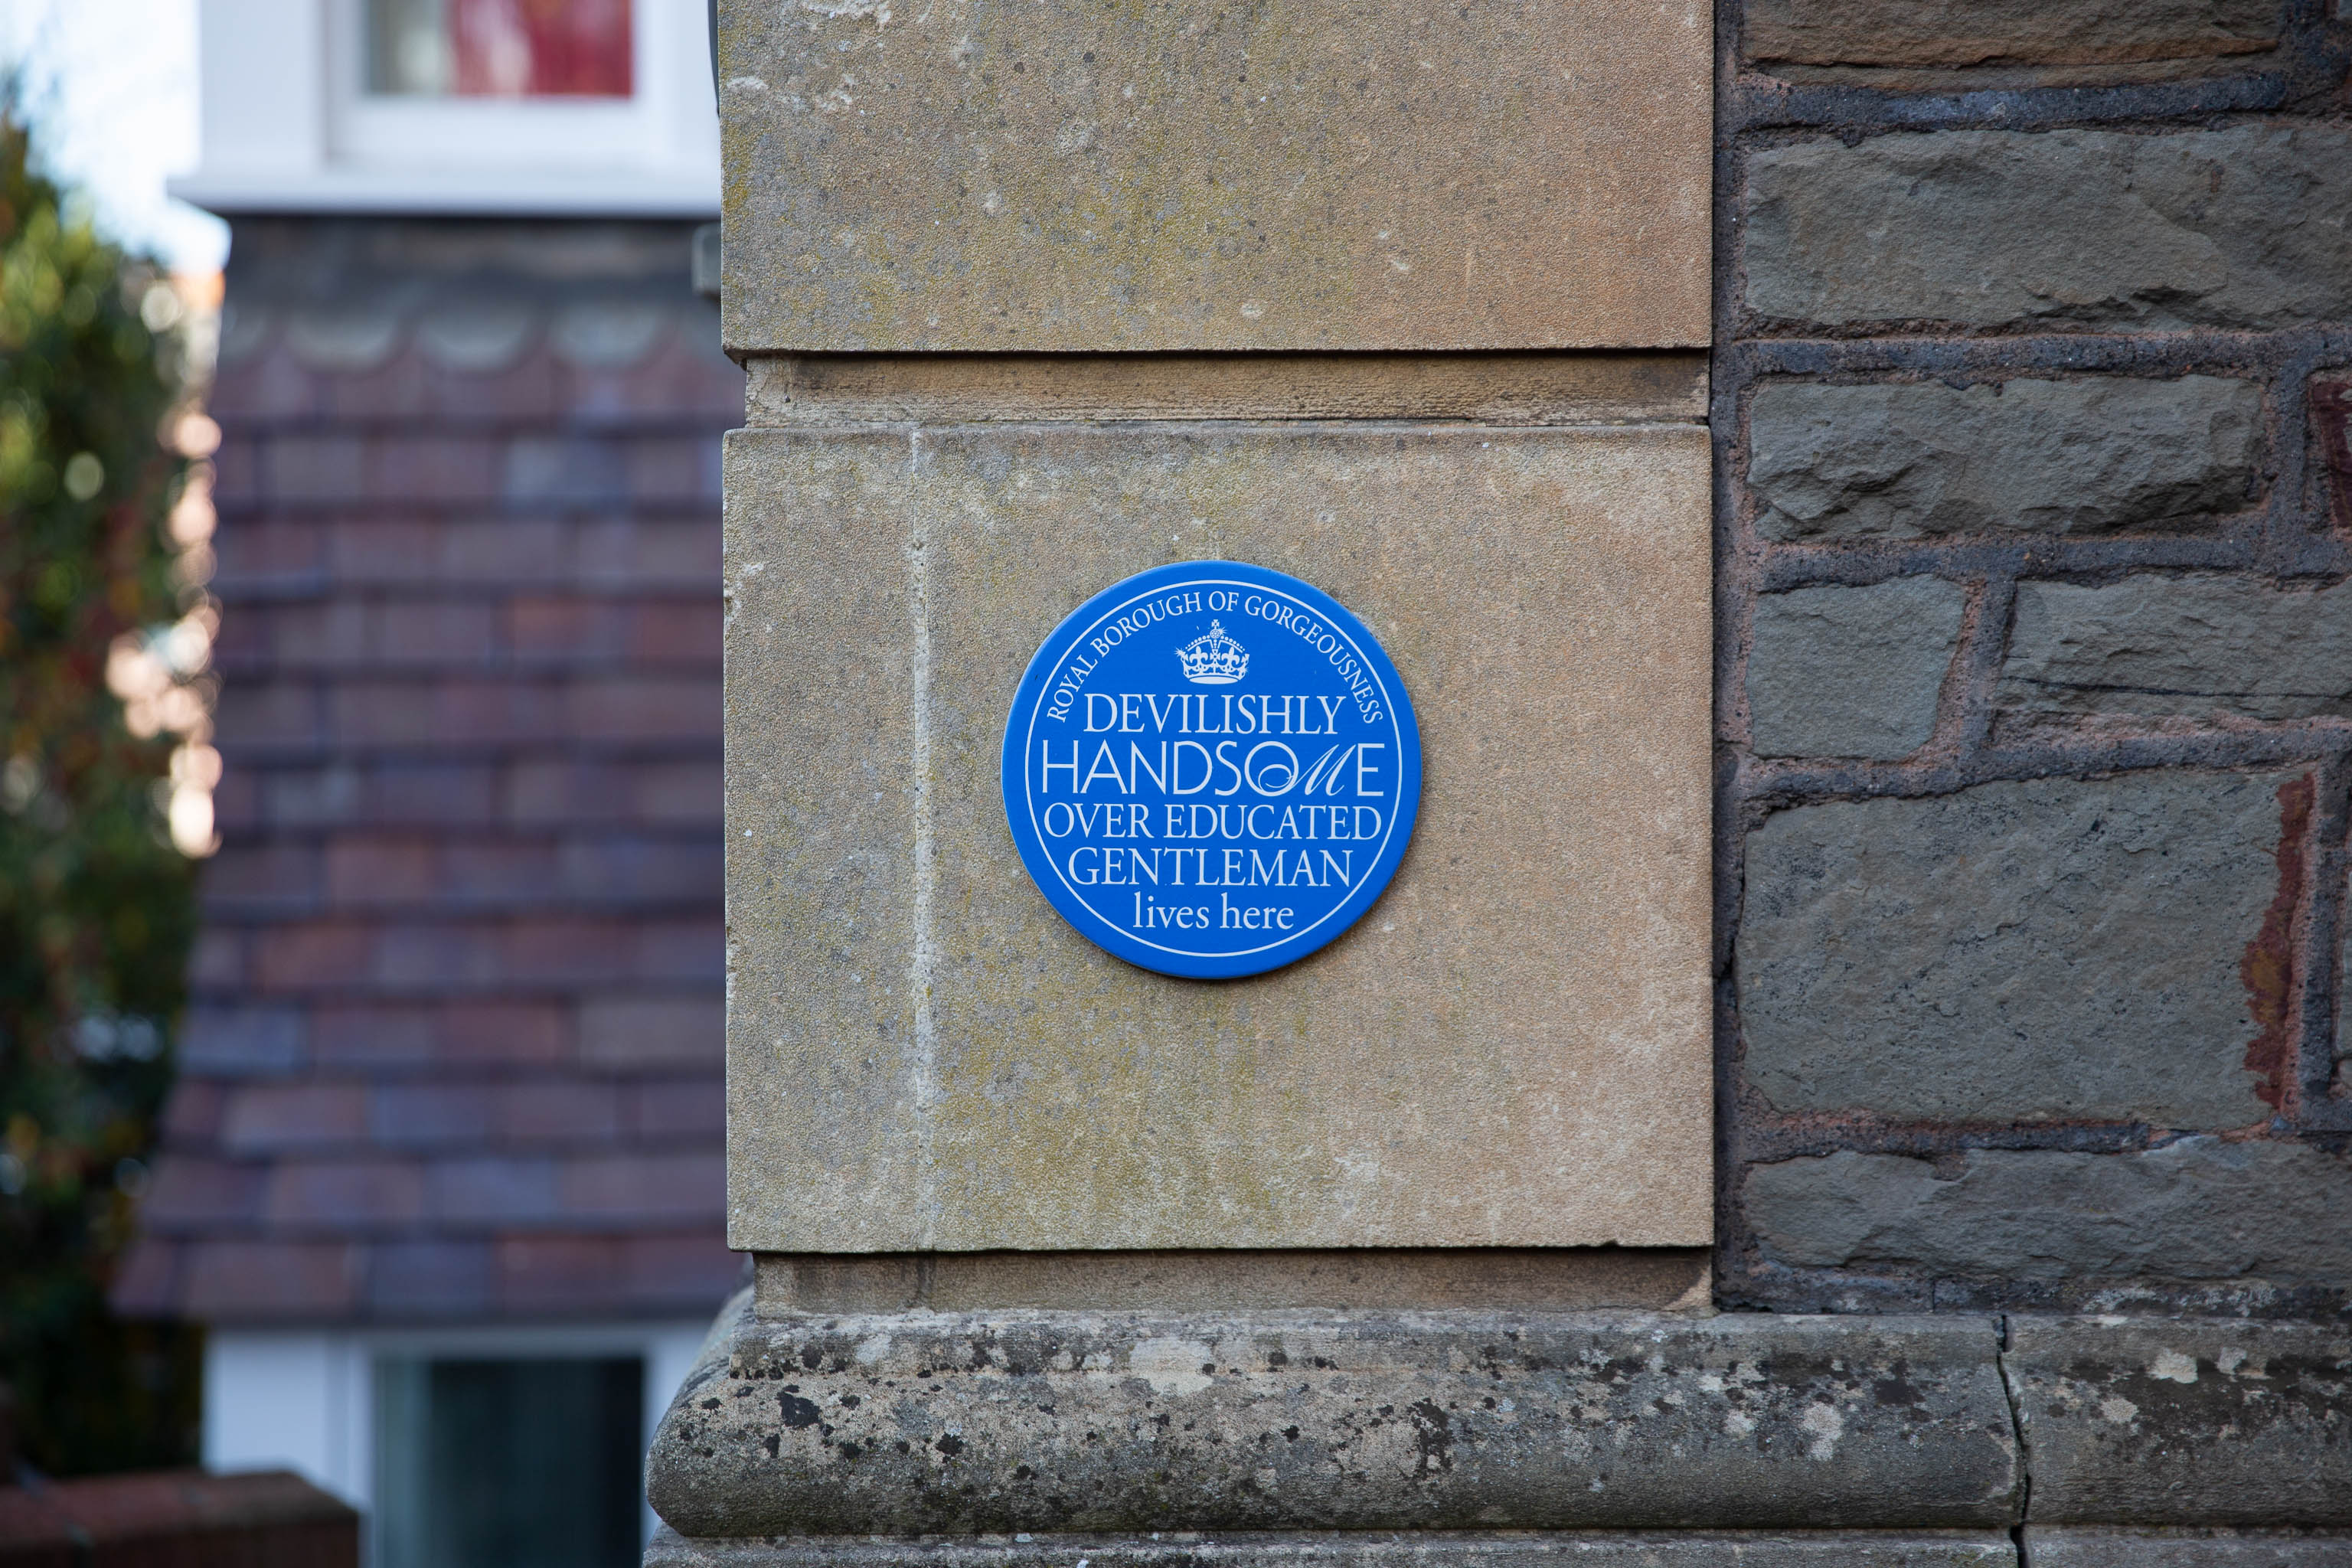 Sigh
I was tempted by the blue plaque.
